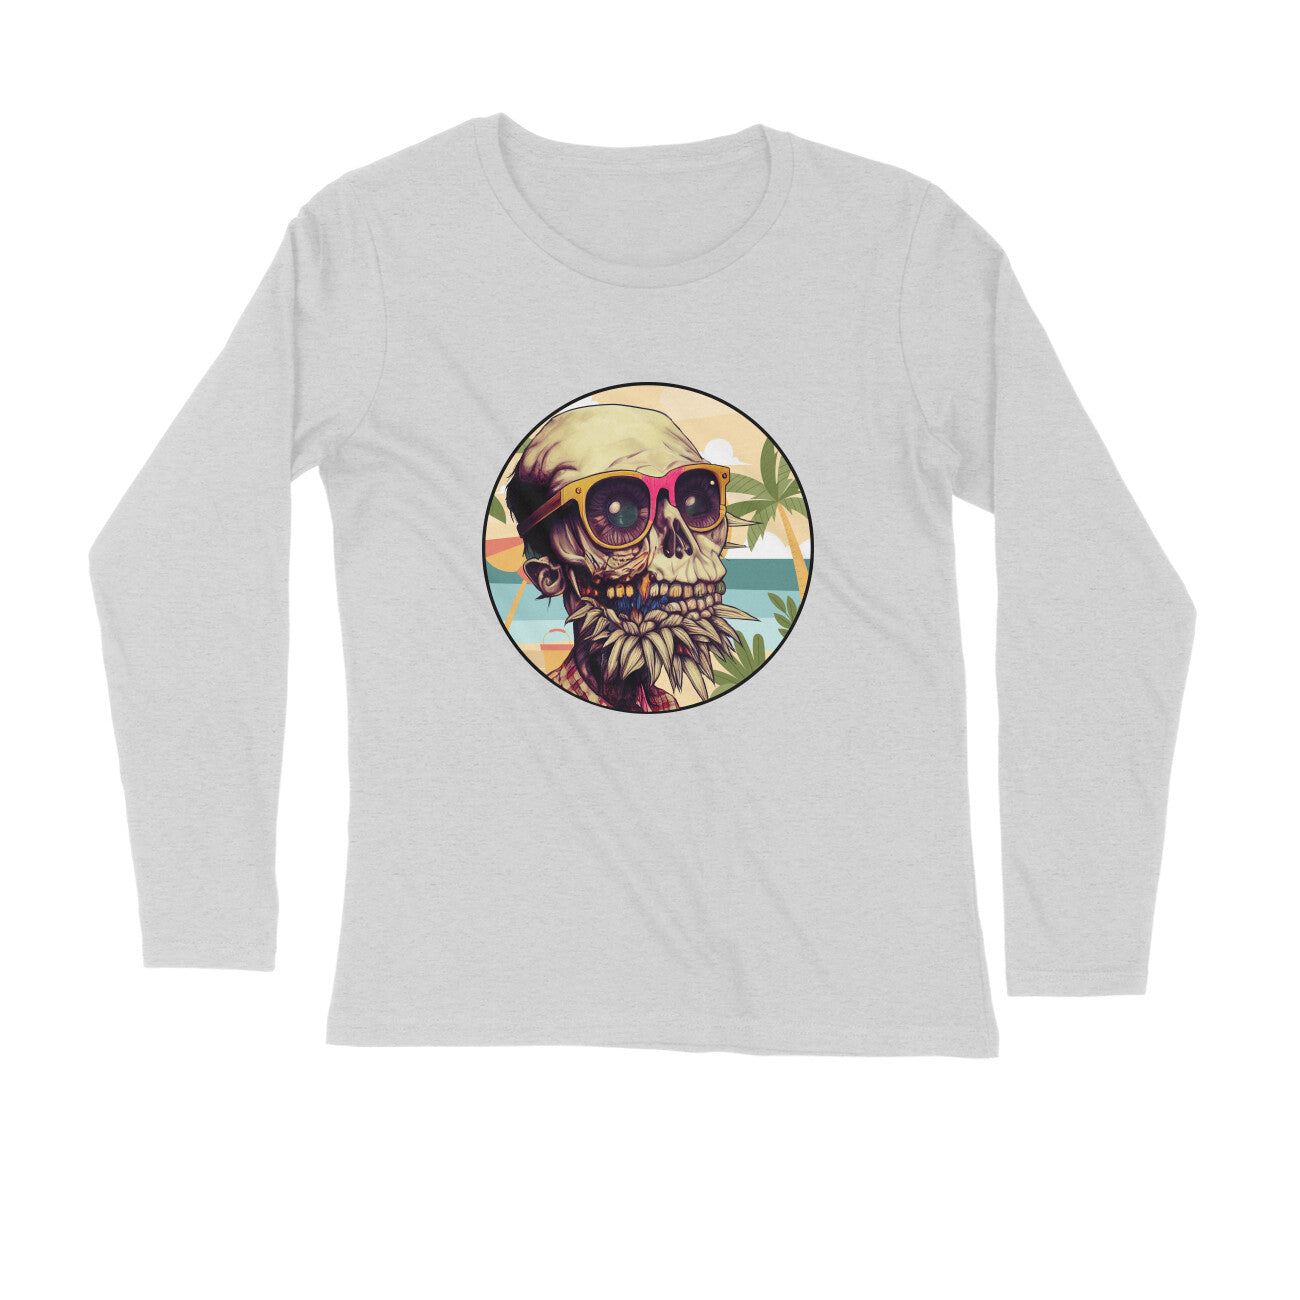 Zombies and monsters Printed Full Sleeves S-Shirt